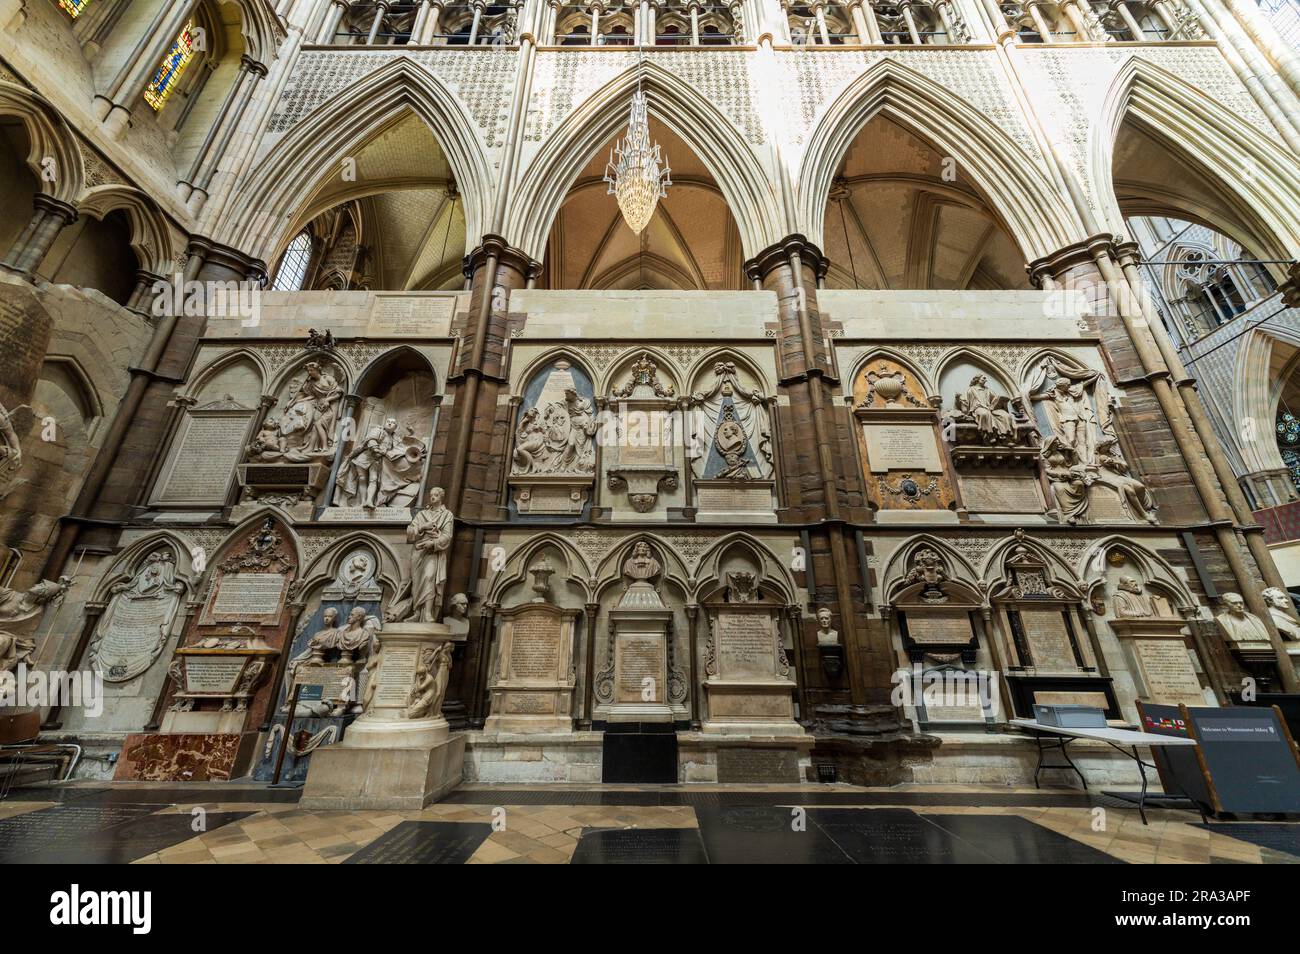 Interior of Westminster Abbey, a historic church and major attraction in London. Visit the Cloisters, Henry VII Lady Chapel and tombs or the monarchs. Stock Photo